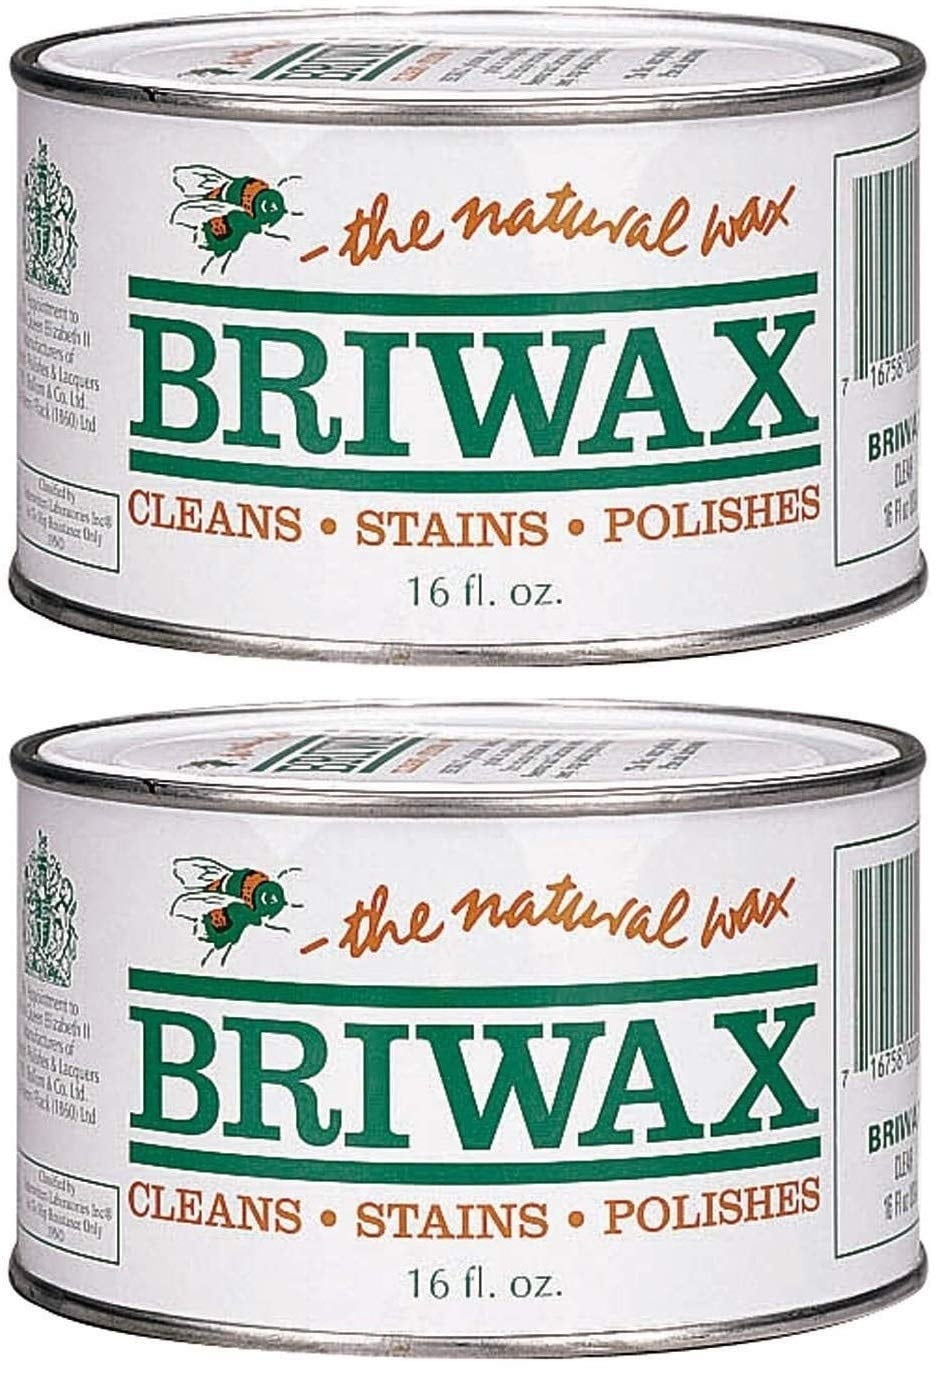 BLOOMFIELD TREASURES - BRIWAX - CLEANS, STAINS AND POLISHES ALL IN ONE  PRODUCT